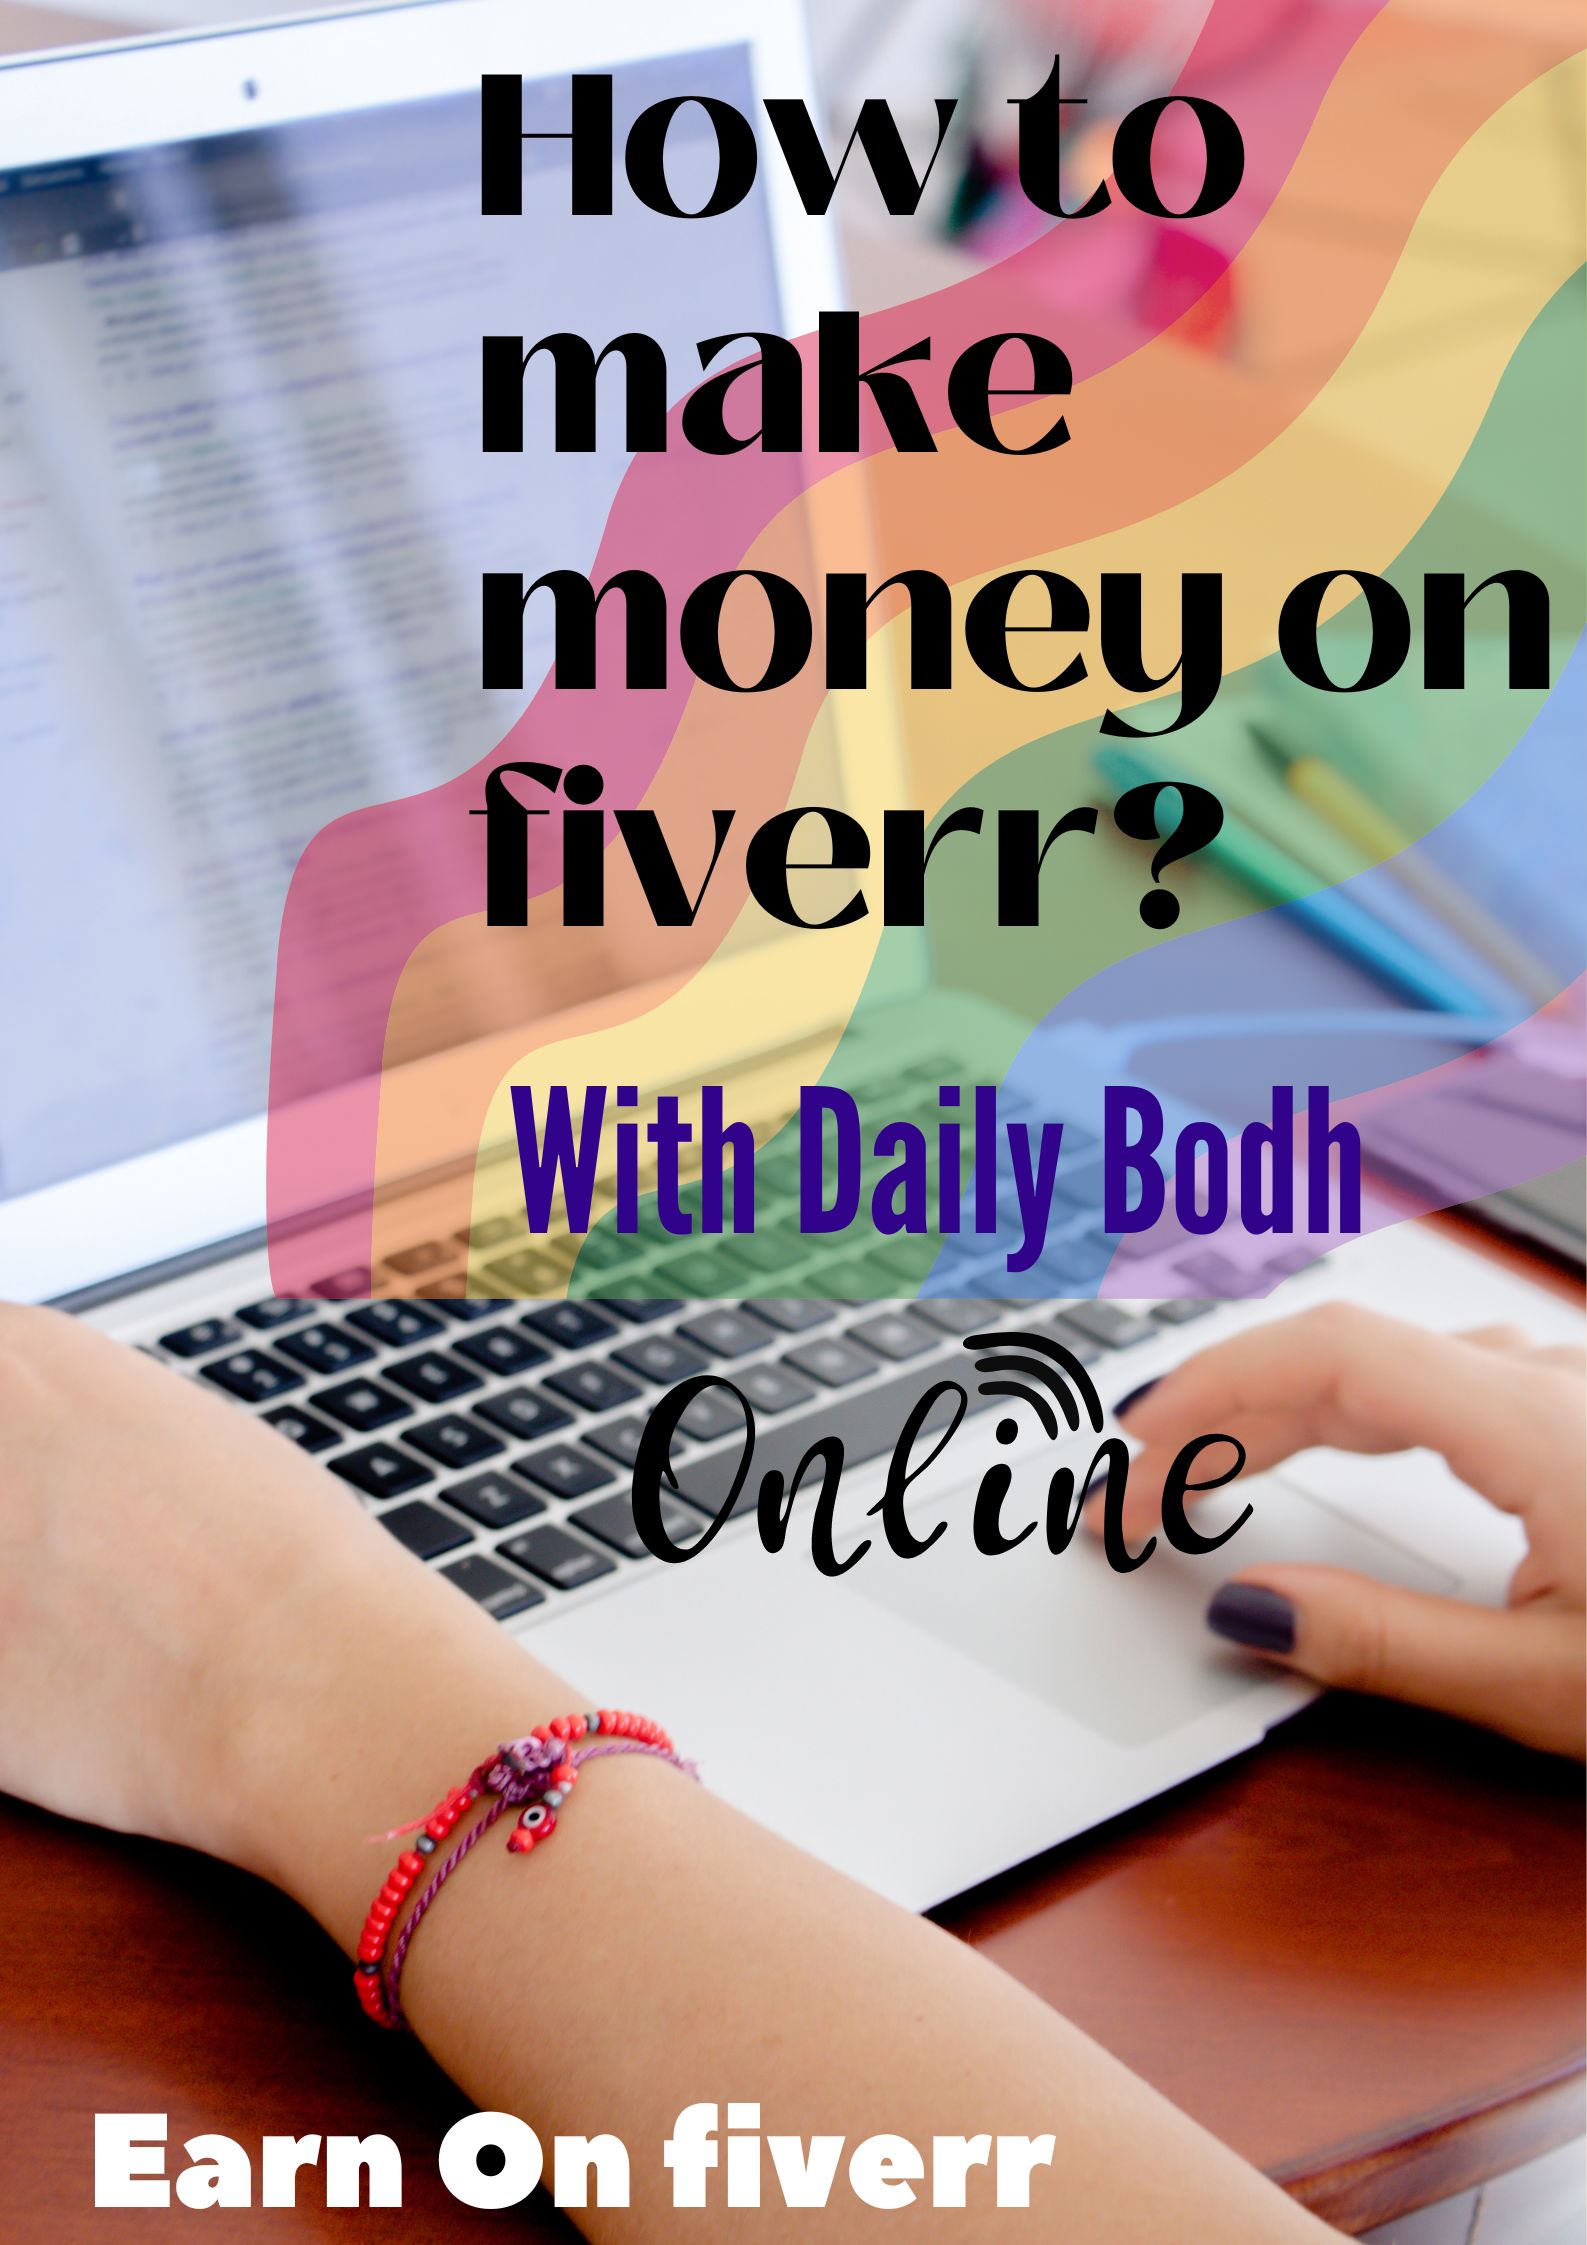 How to make money on fiverr